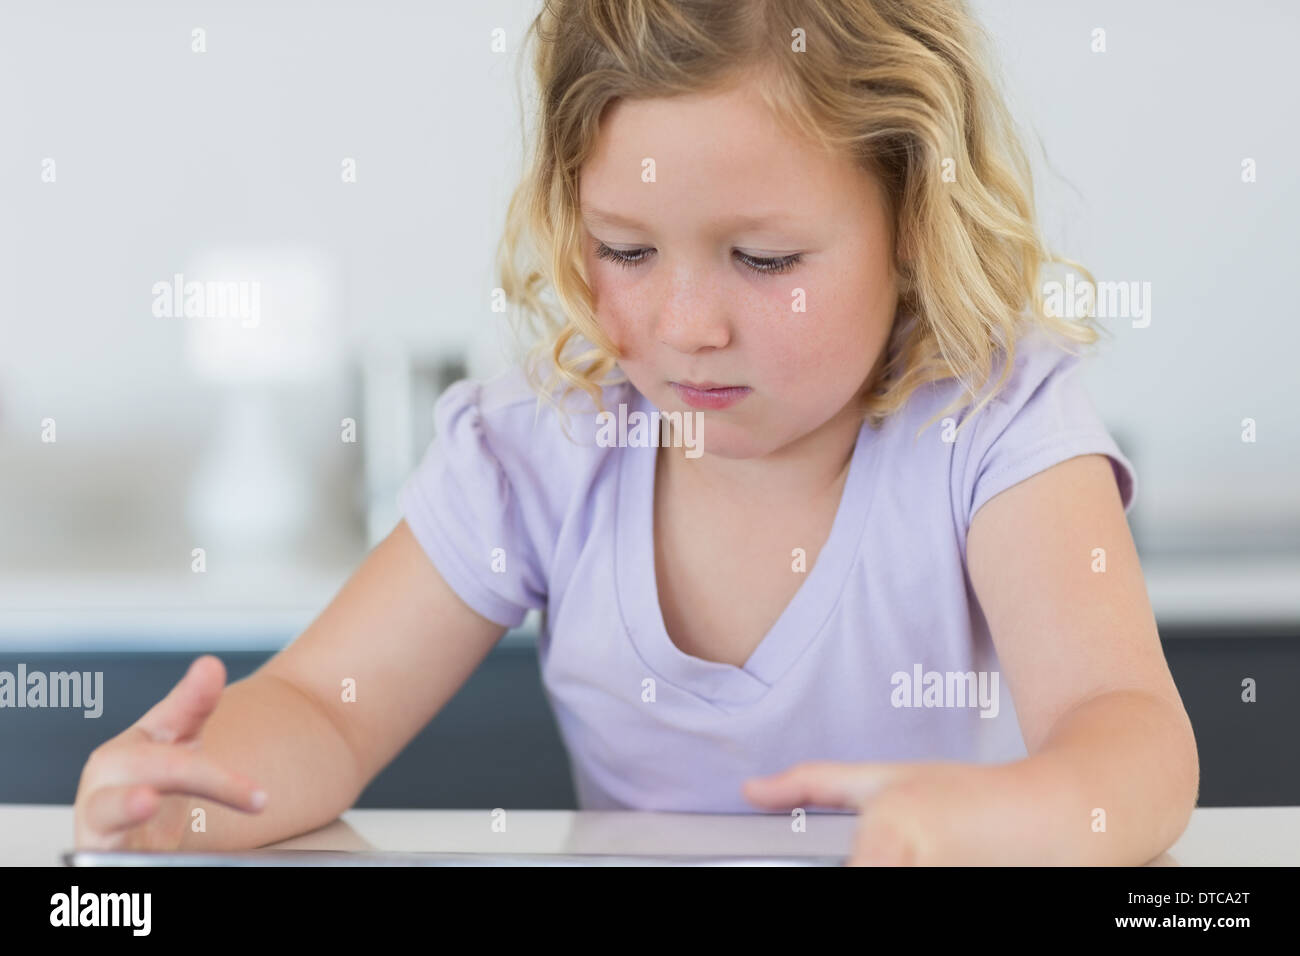 Girl using digital tablet at table Stock Photo